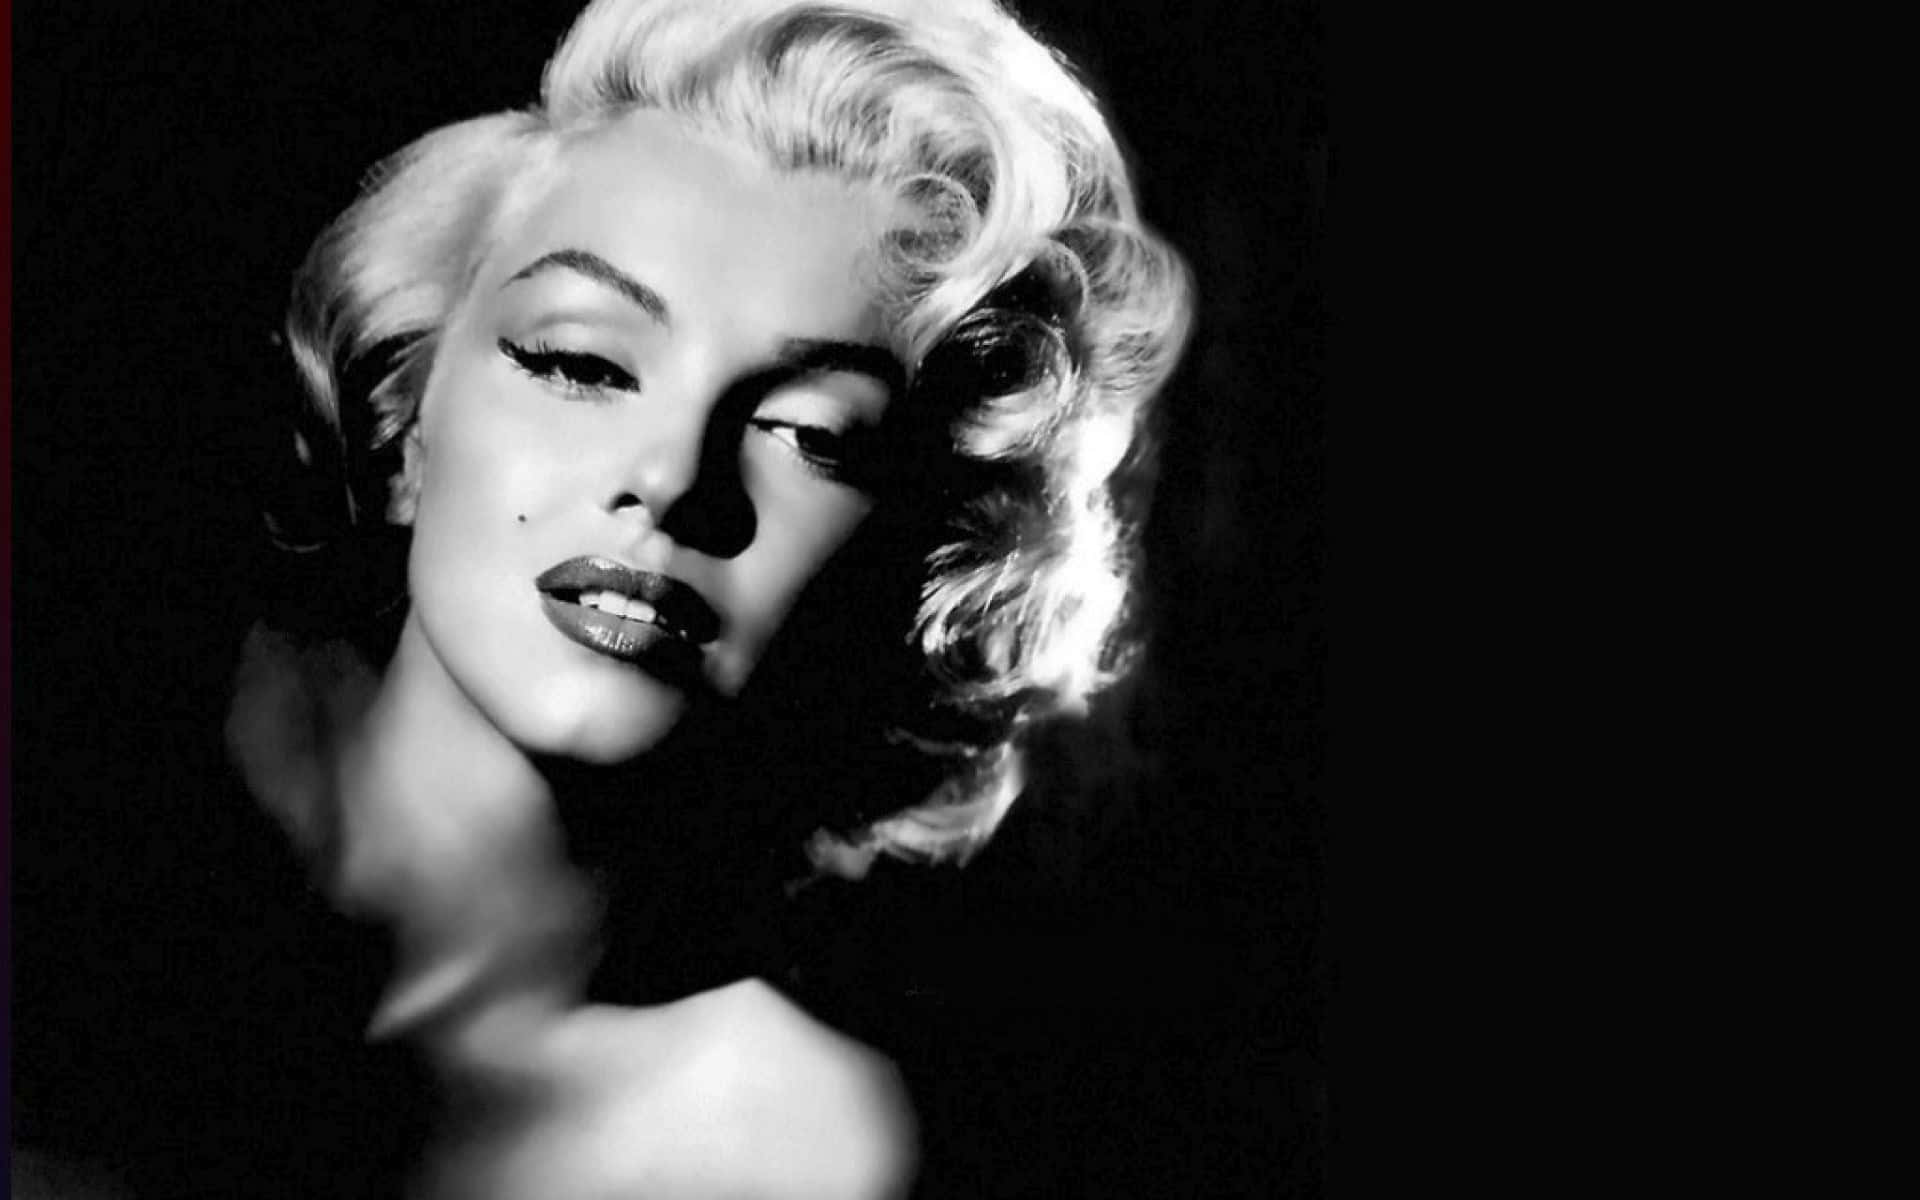 Timeless beauty - The iconic Marilyn Monroe